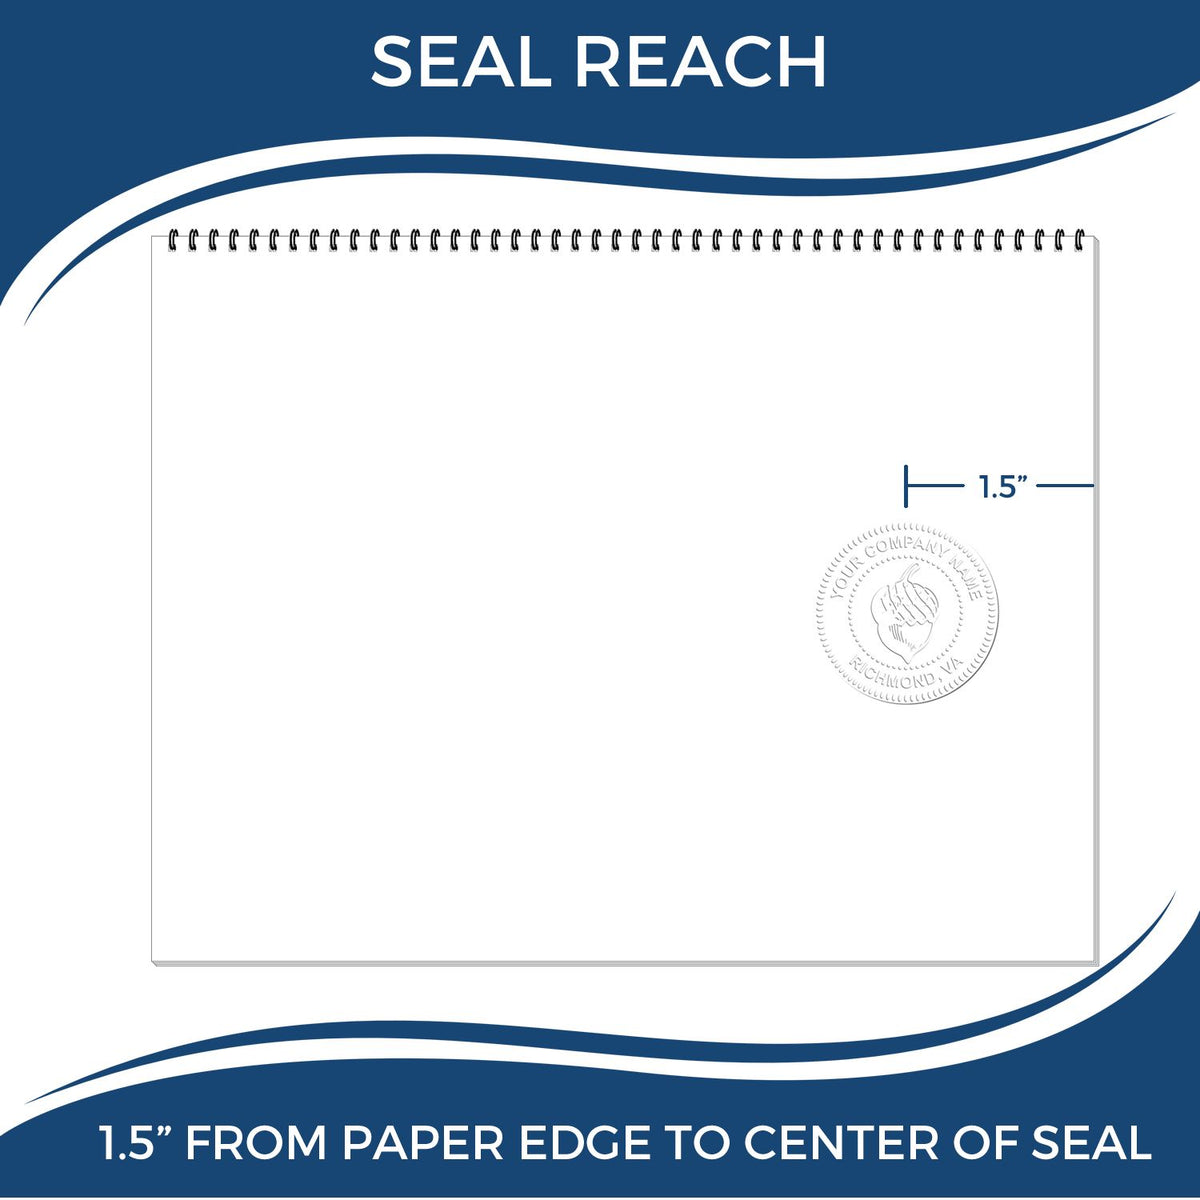 An infographic showing the seal reach which is represented by a ruler and a miniature seal image of the Soft Pocket Delaware Landscape Architect Embosser